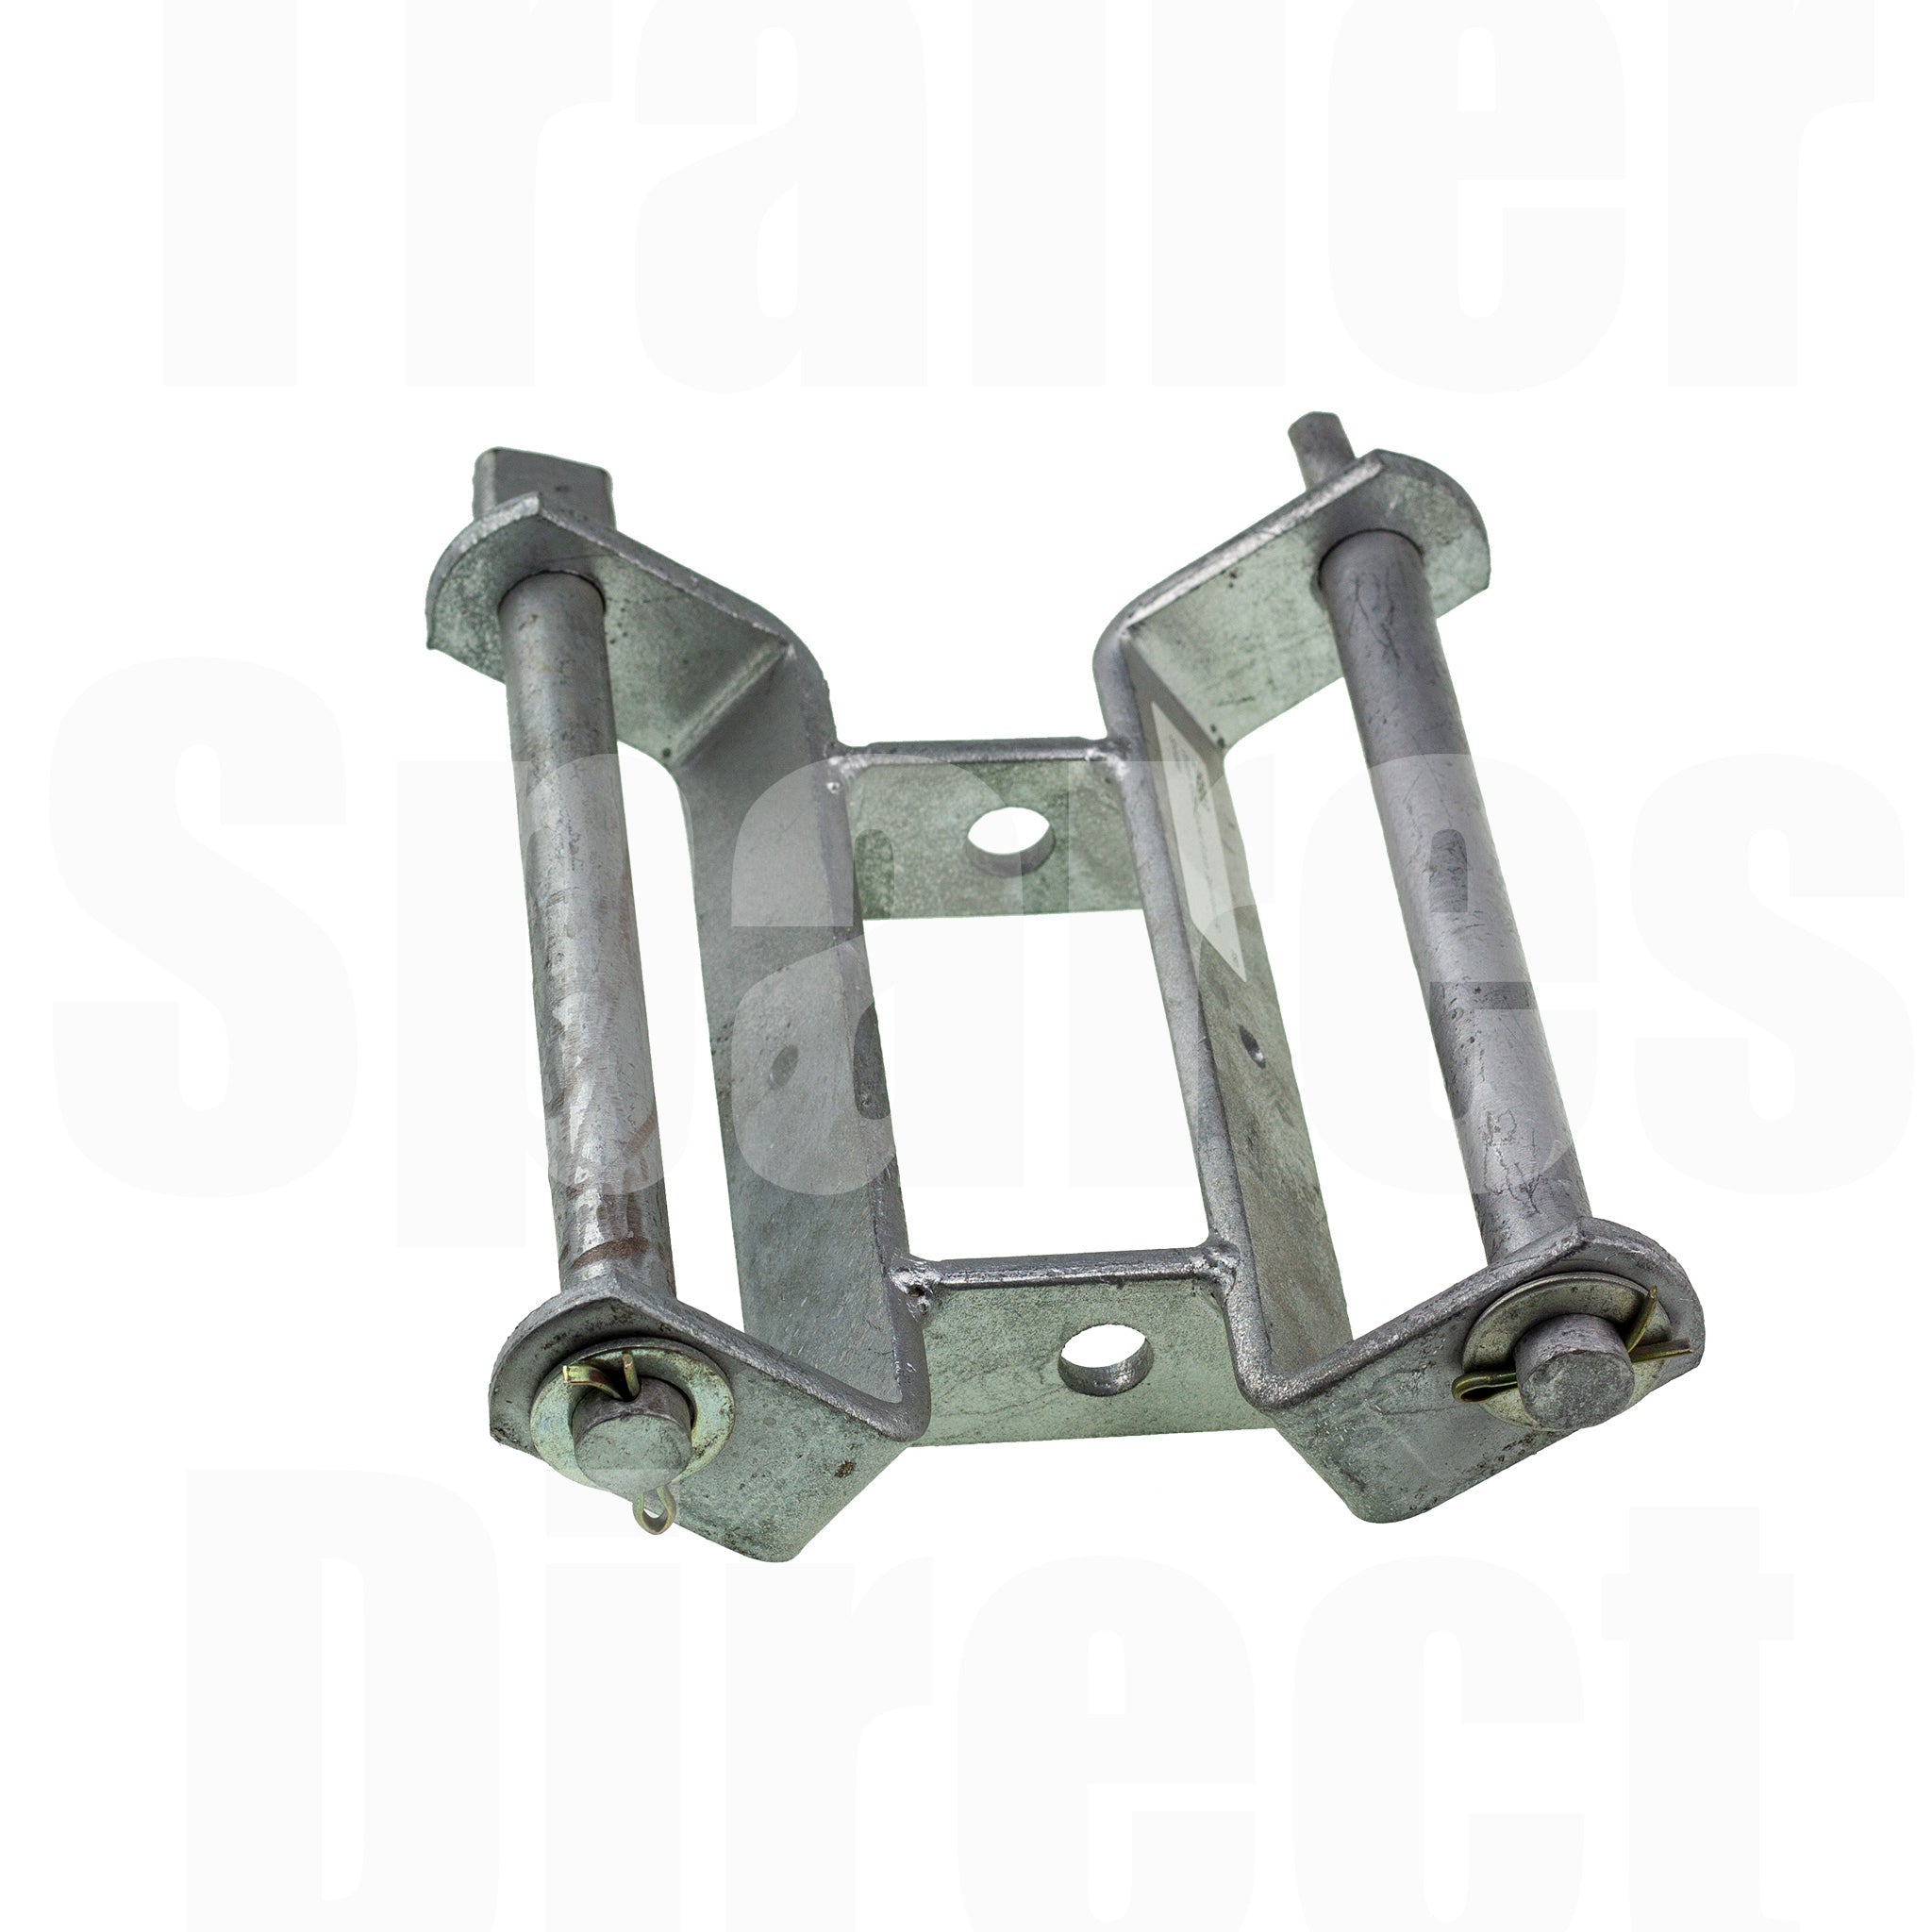 Double Roller Bracket 8 inch Galvanised includes Spindles